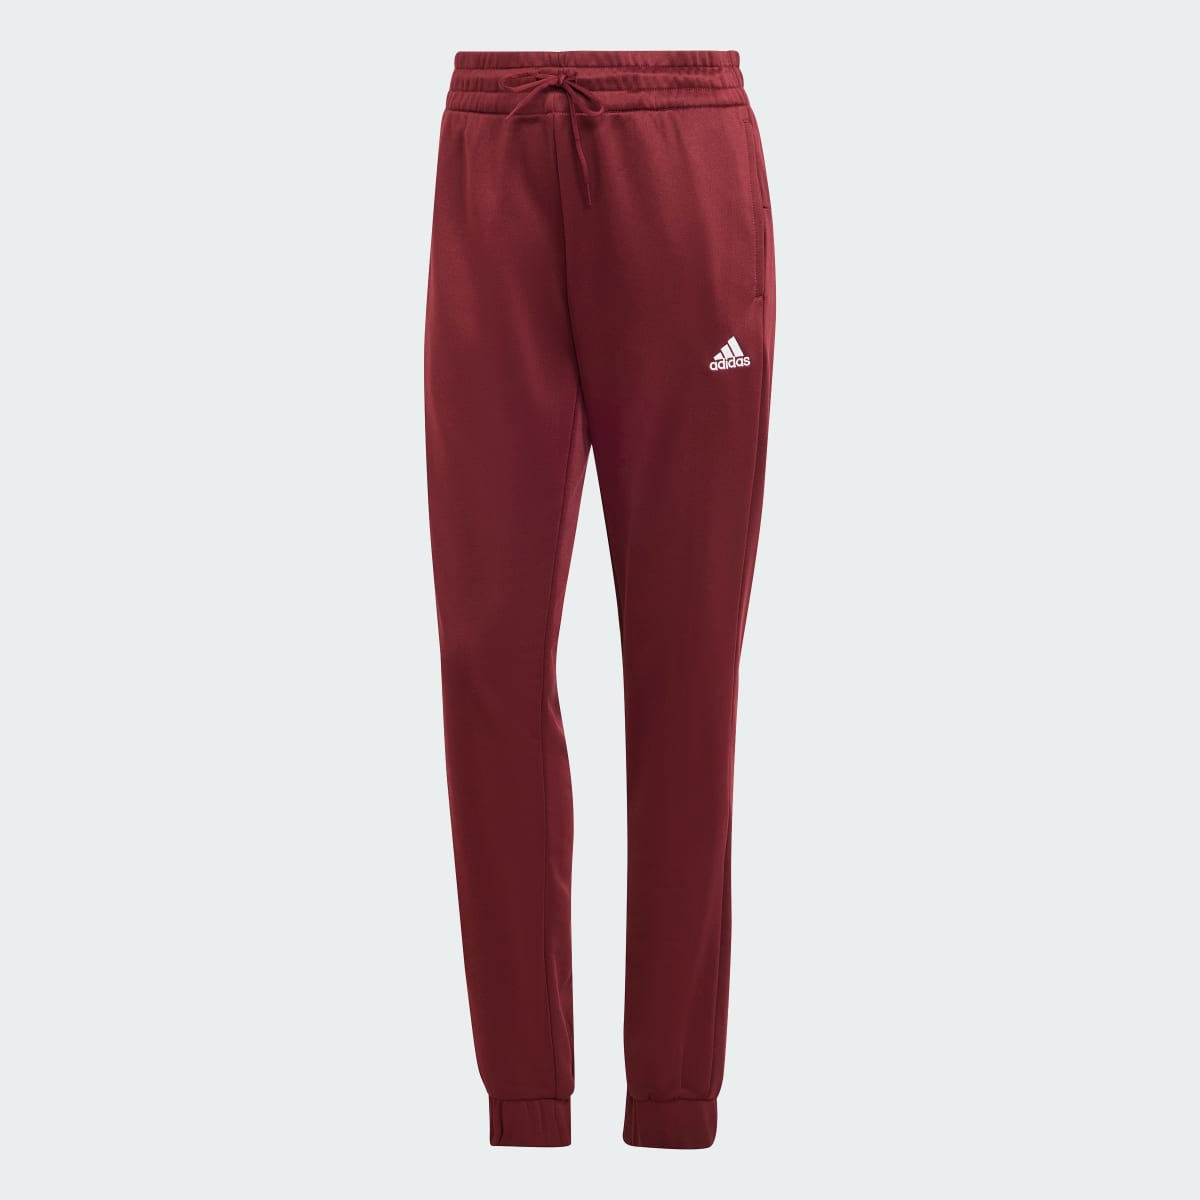 Adidas Linear Track Suit. 7